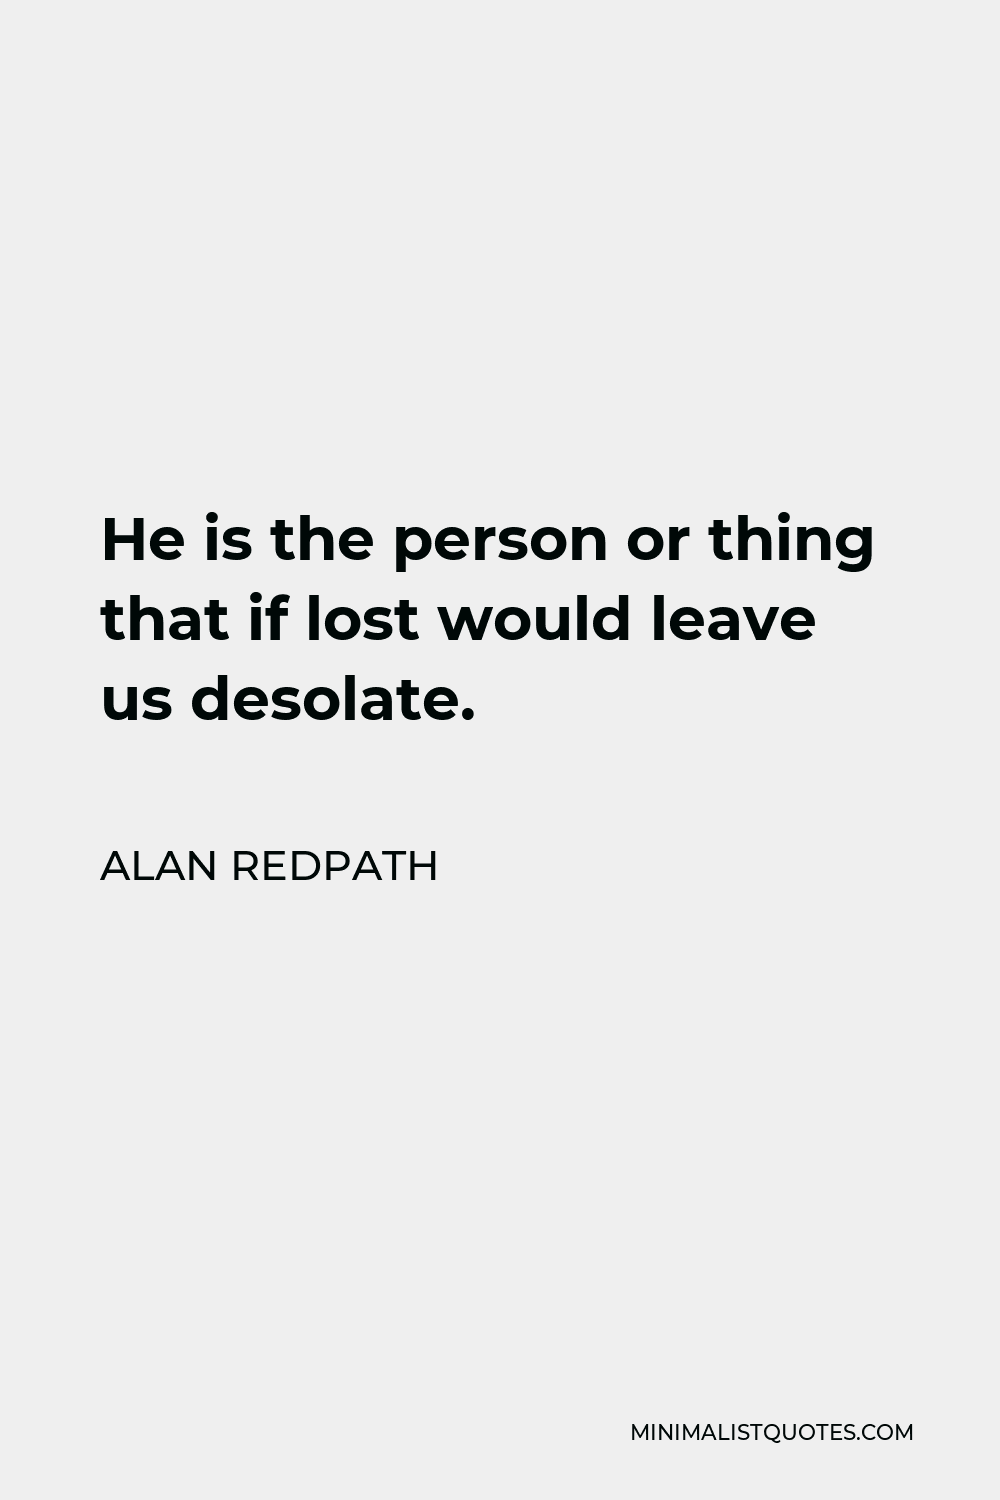 Alan Redpath Quote - He is the person or thing that if lost would leave us desolate.